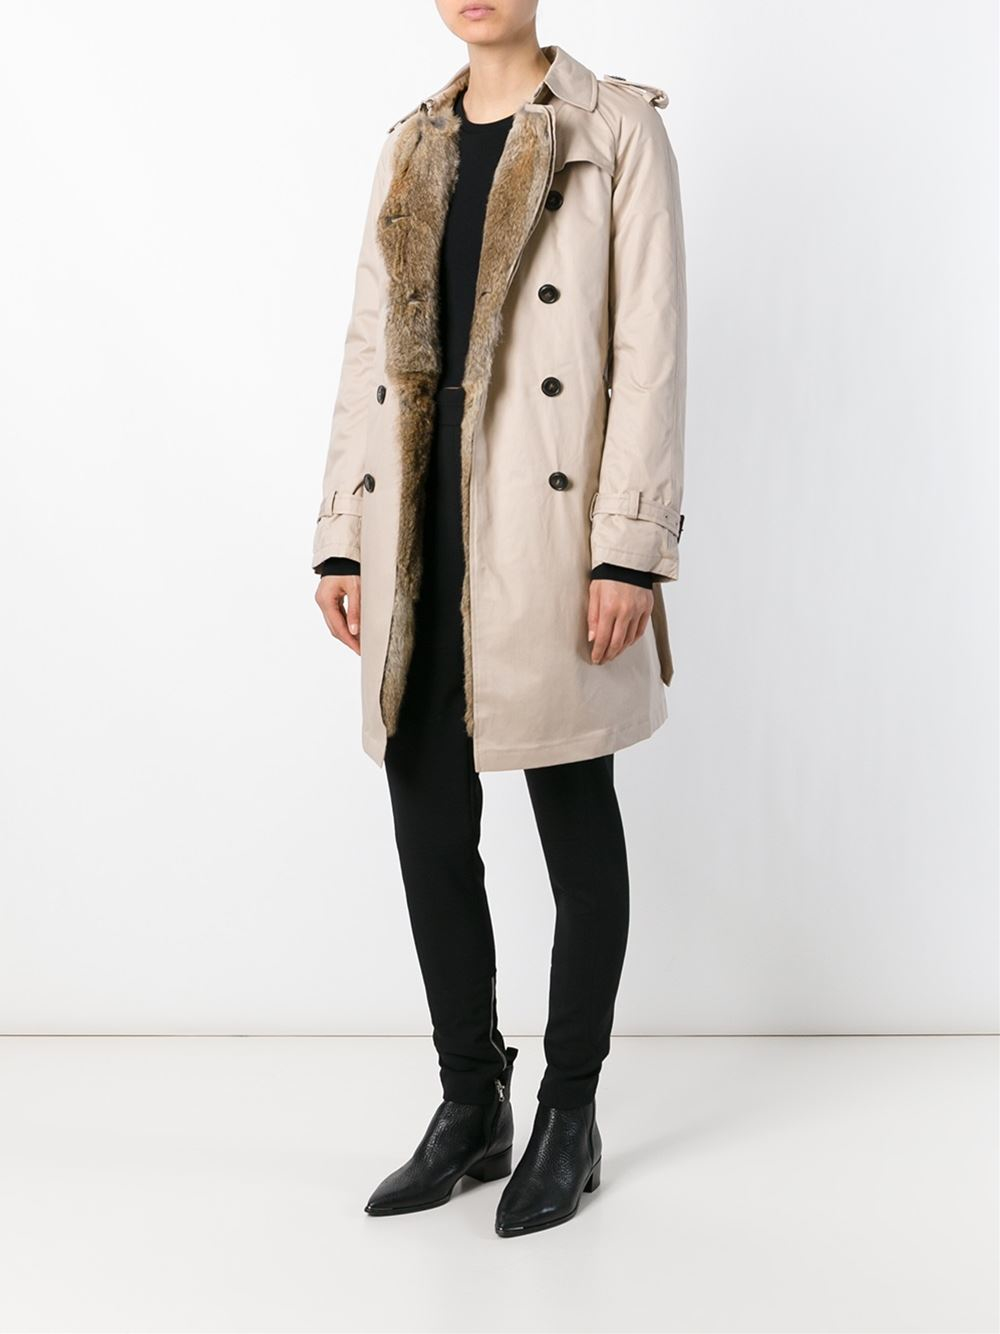 Lyst - Woolrich Rabbit Fur Trim Padded Trench Coat in Natural